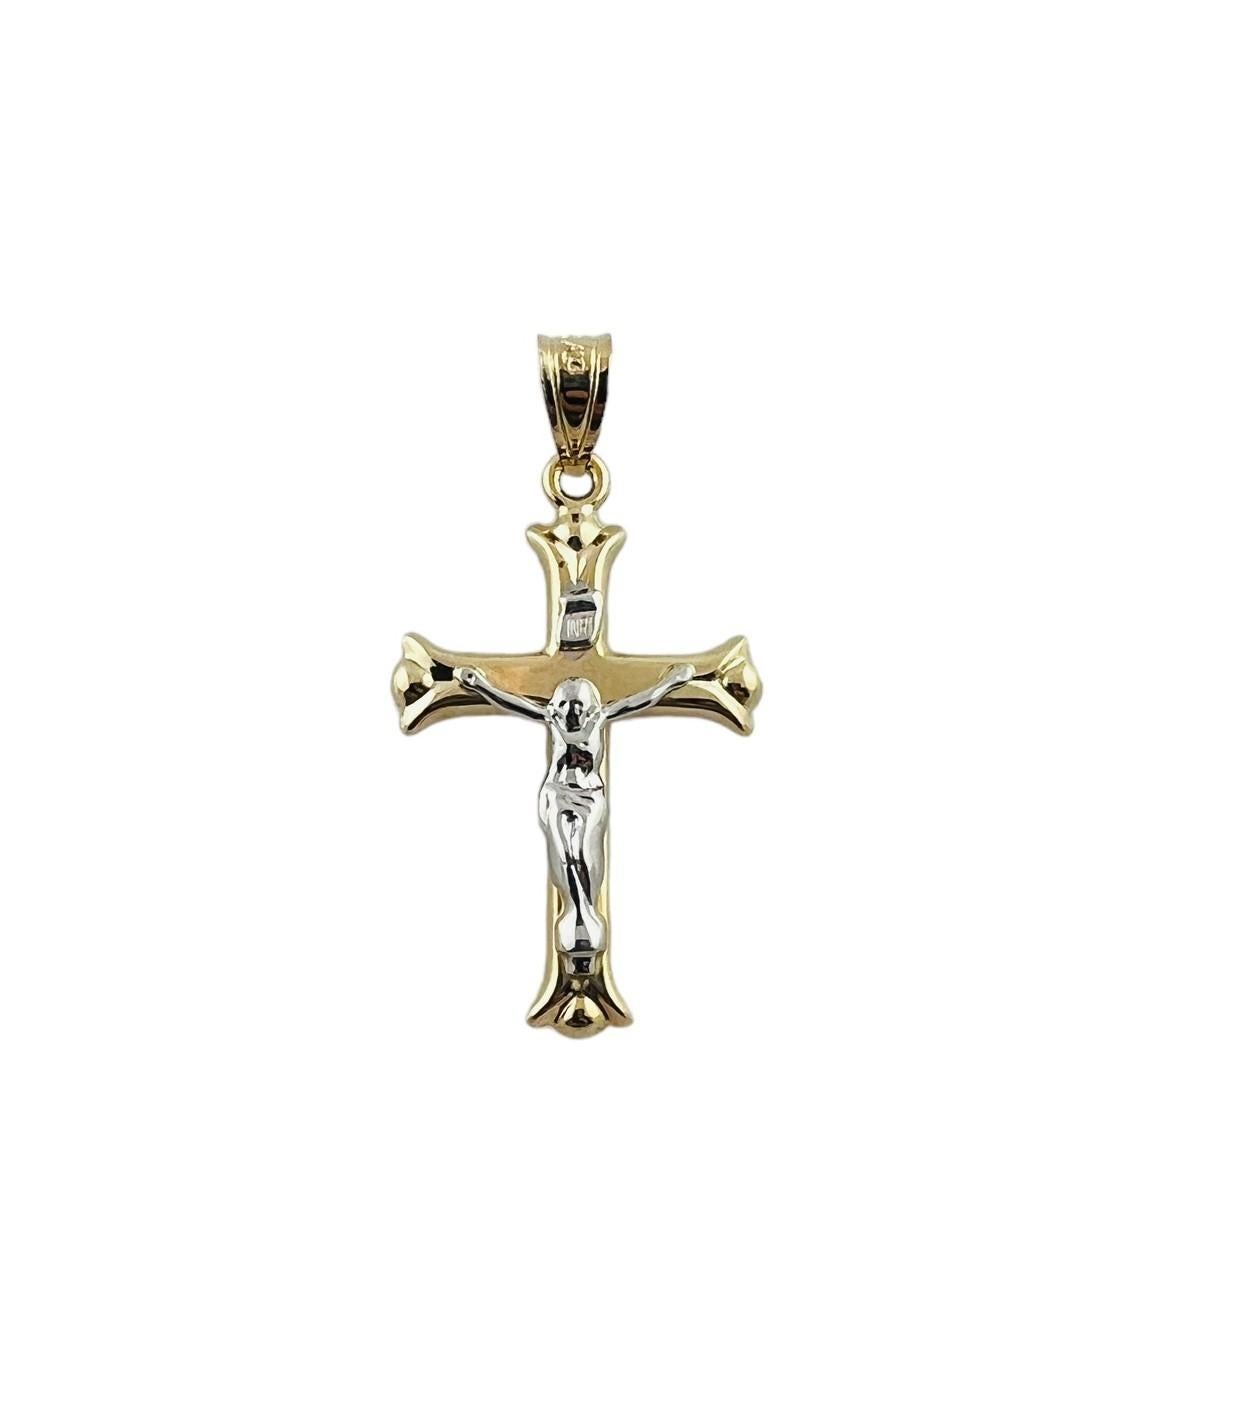 14K Yellow and White Gold Two Toned Crucifix Cross Pendant #15545 For Sale 2